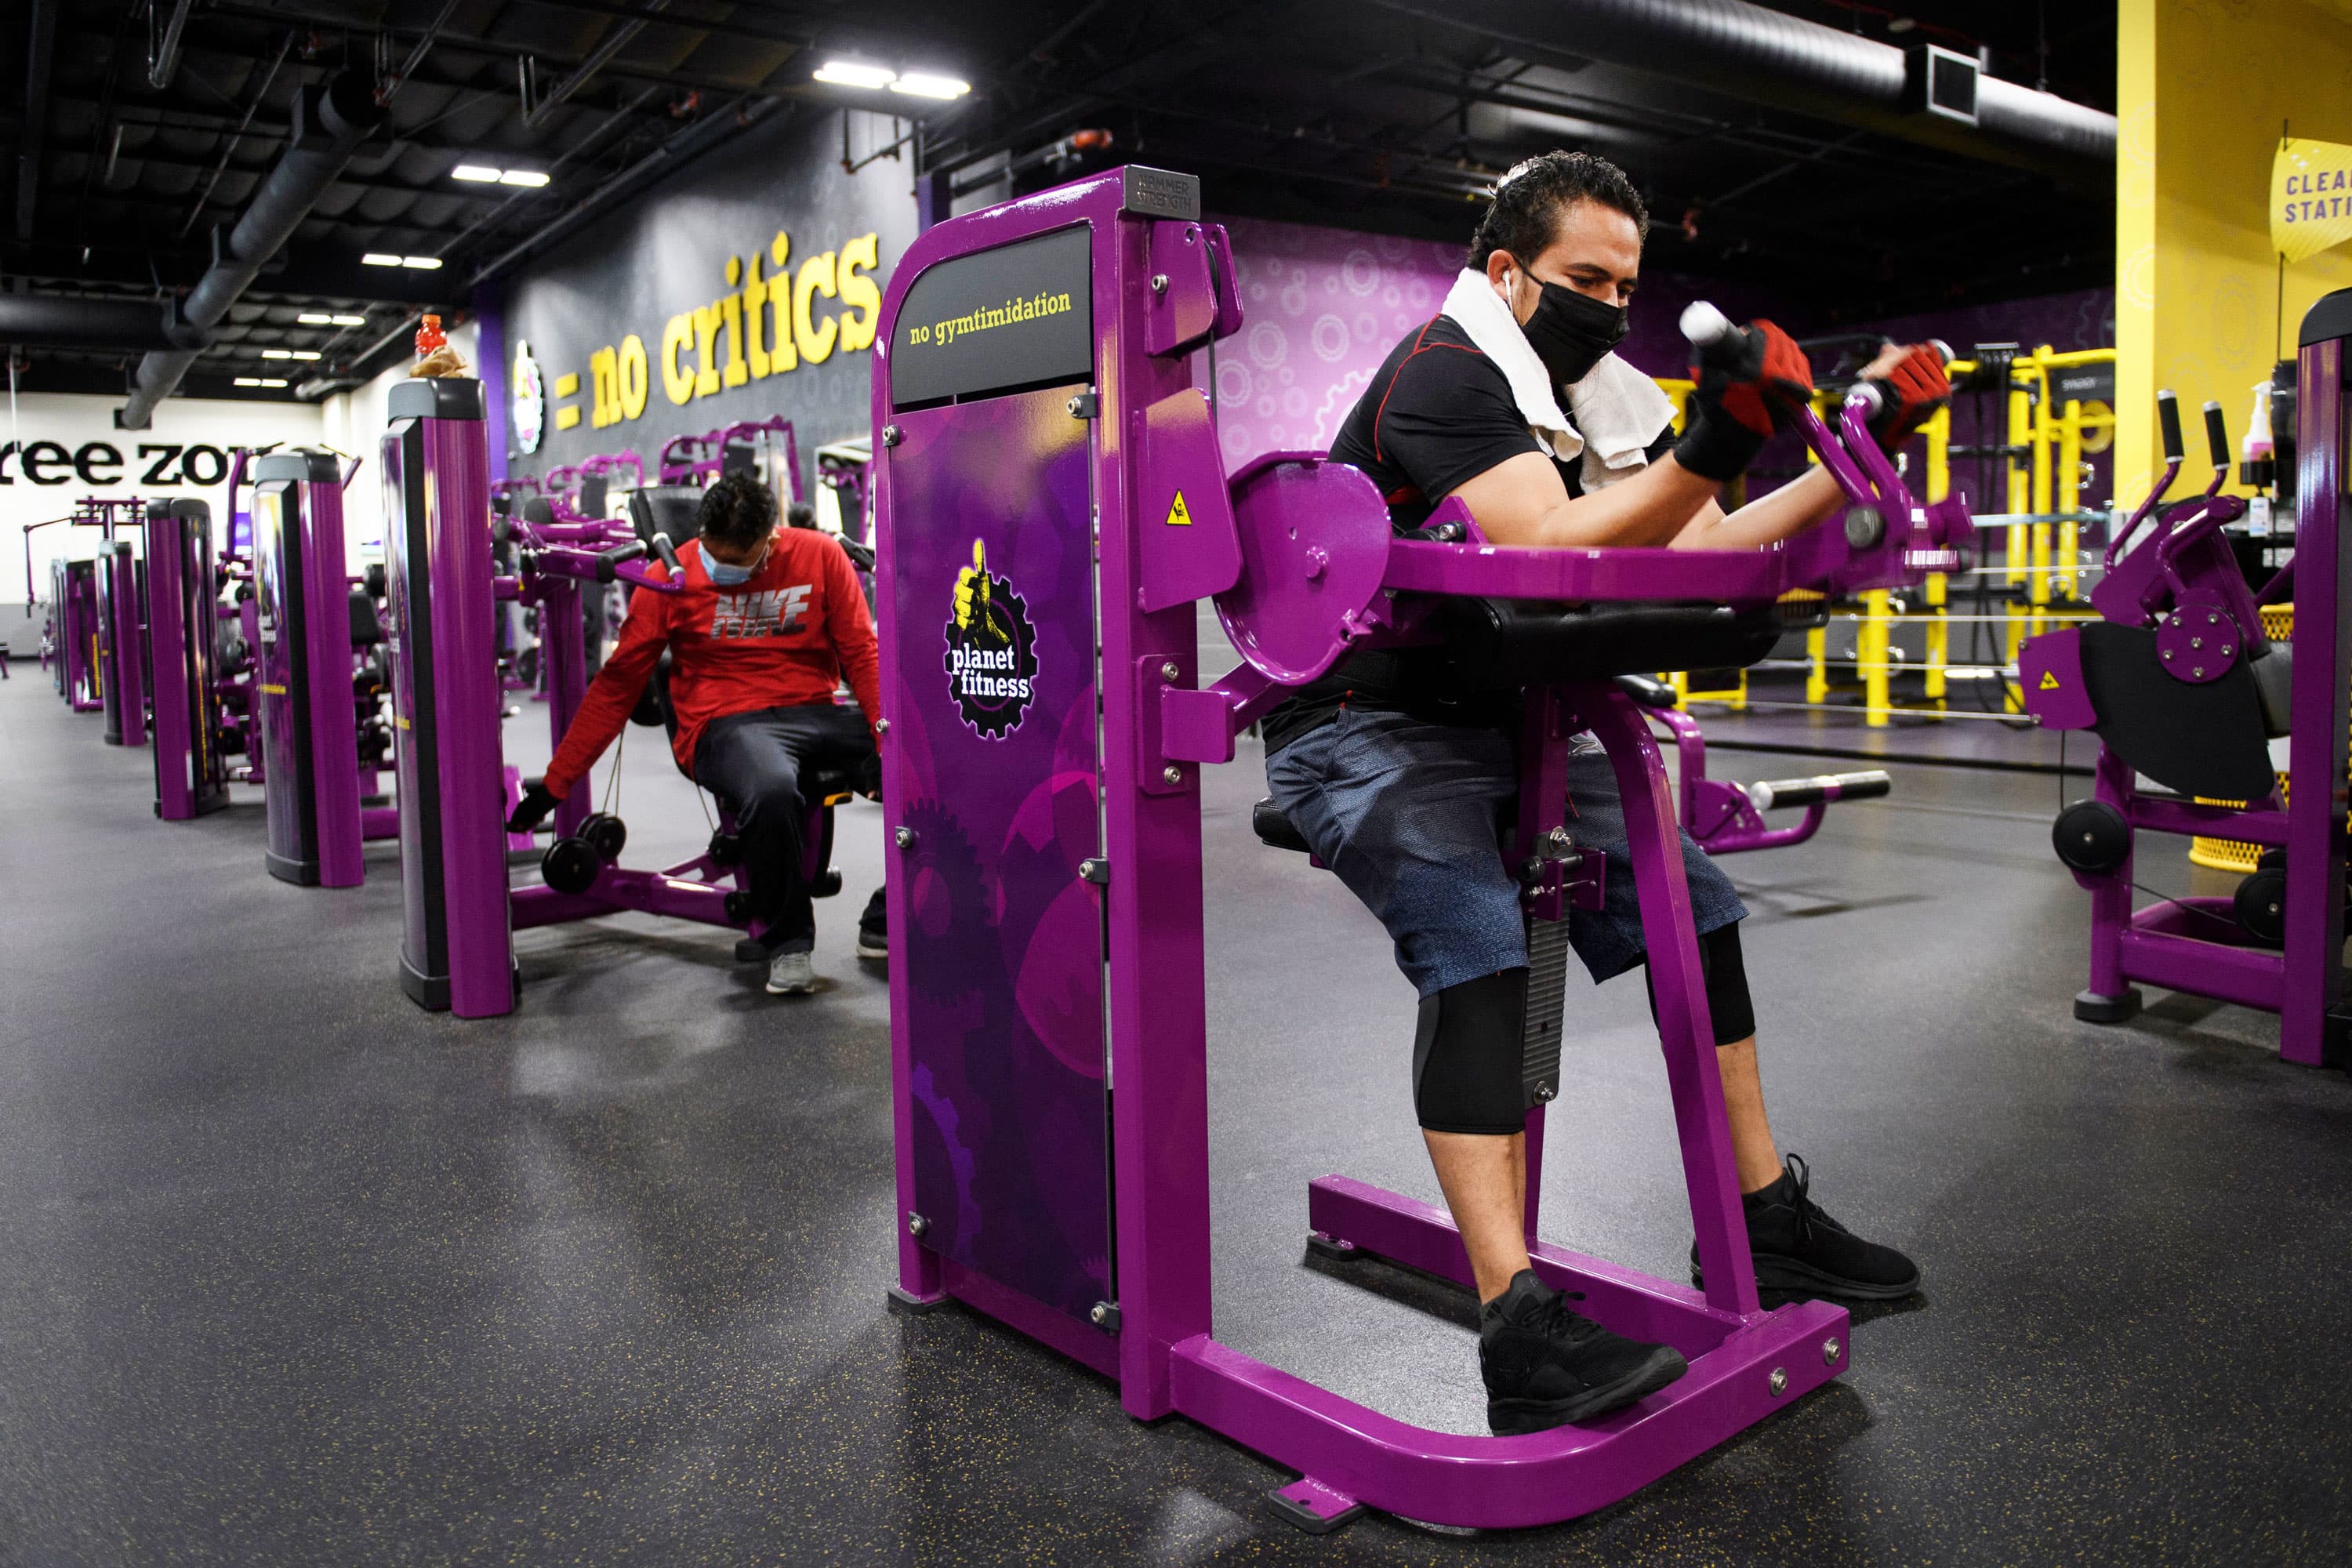 2. Peloton Bikes Not Available at Planet Fitness Locations